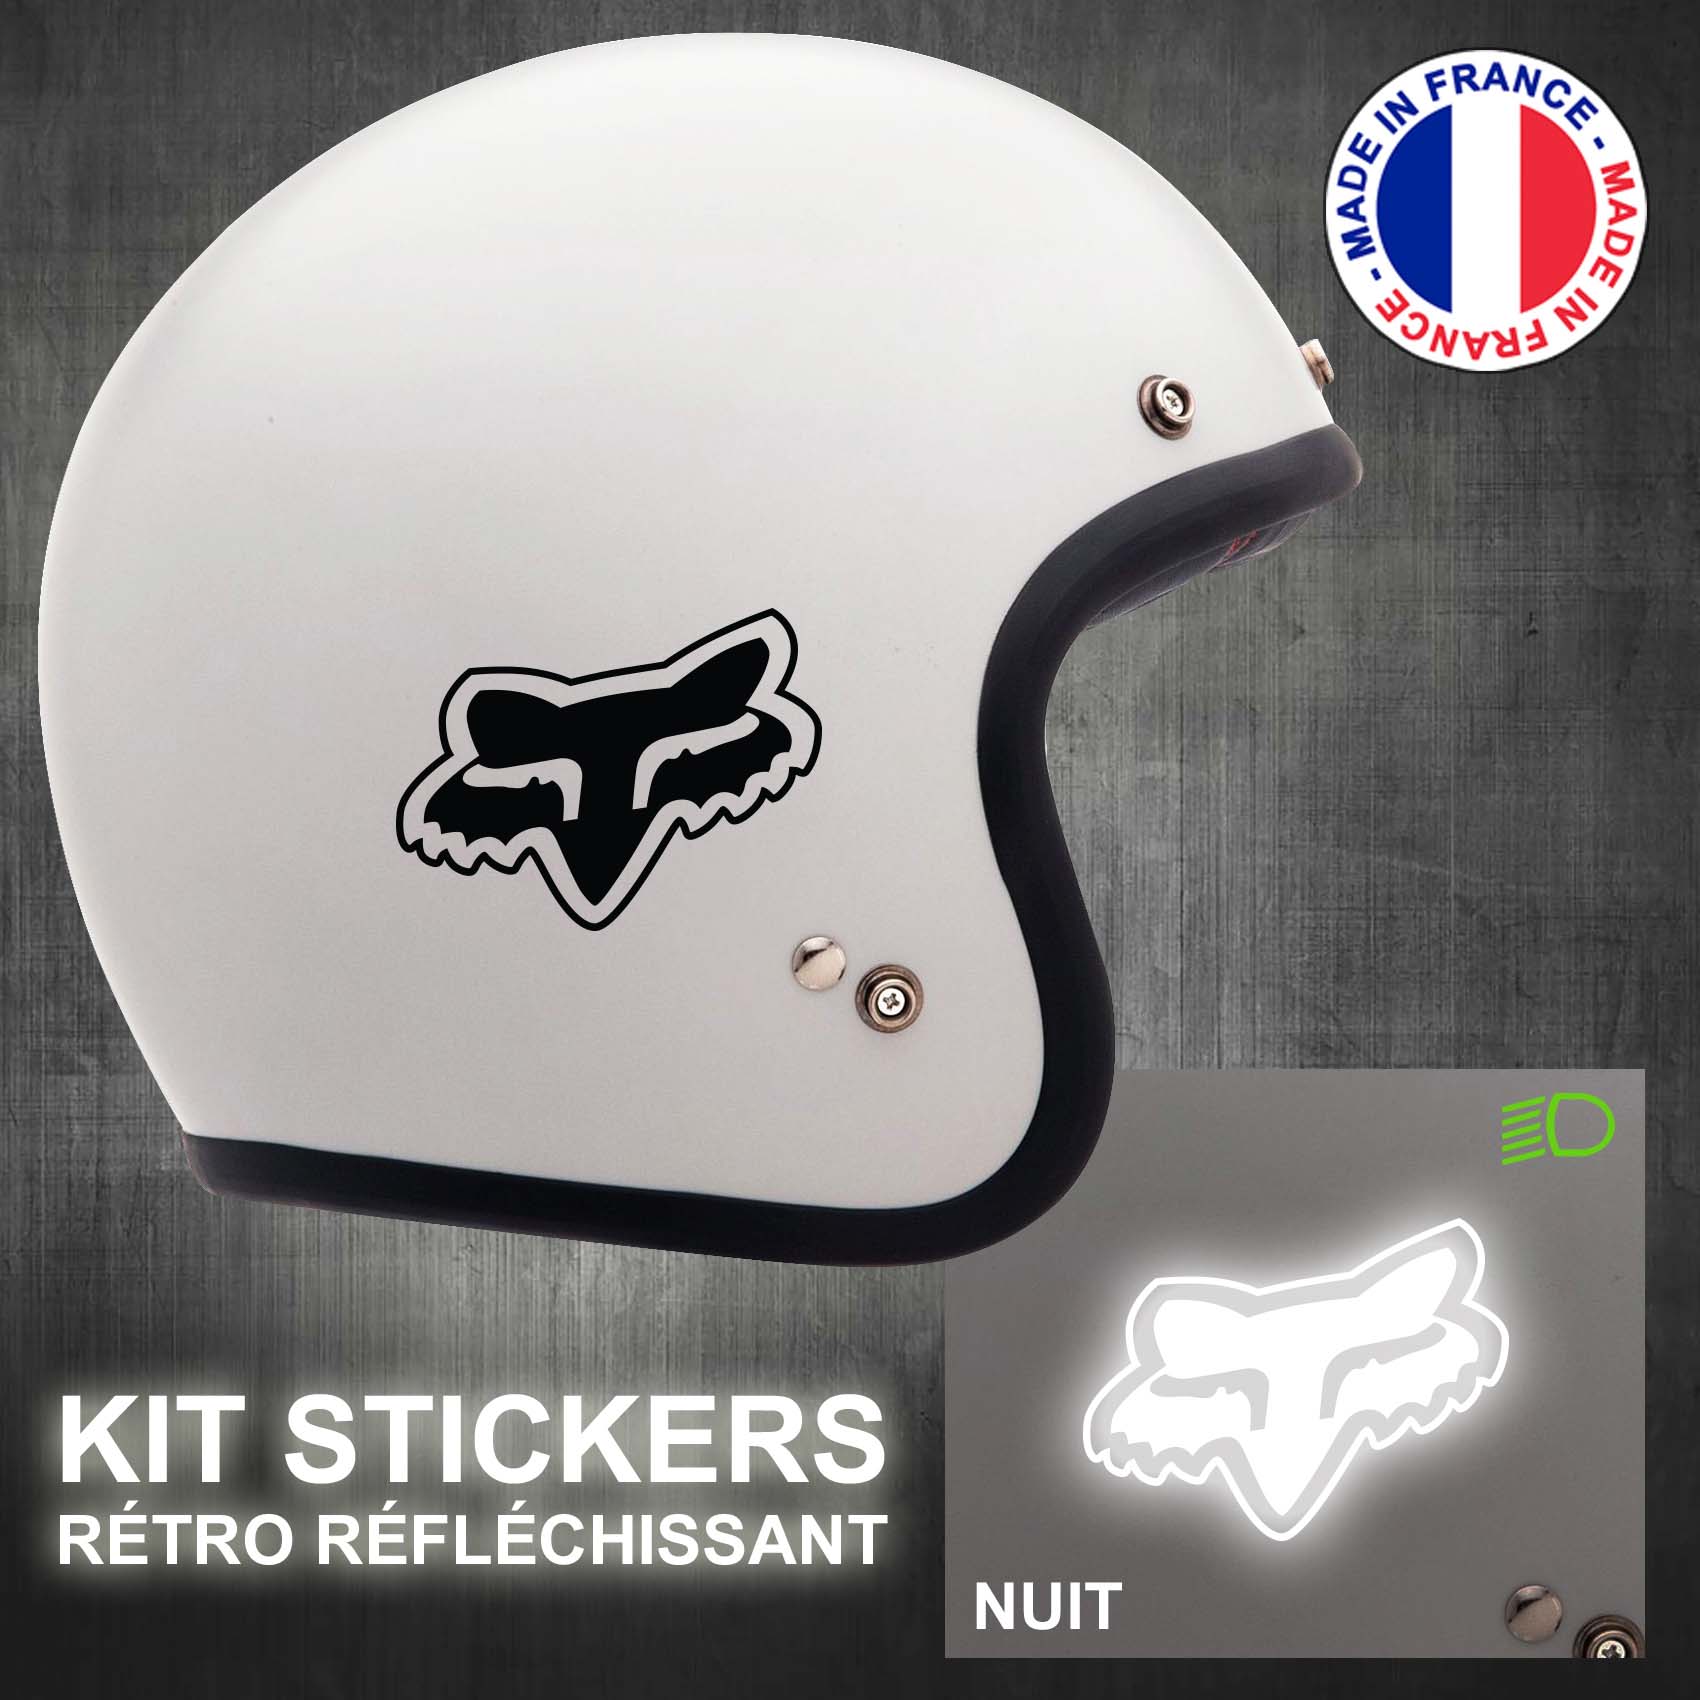 stickers-casque-moto-fox-ref3-retro-reflechissant-autocollant-moto-velo-tuning-racing-route-sticker-casques-adhesif-scooter-nuit-securite-decals-personnalise-personnalisable-min